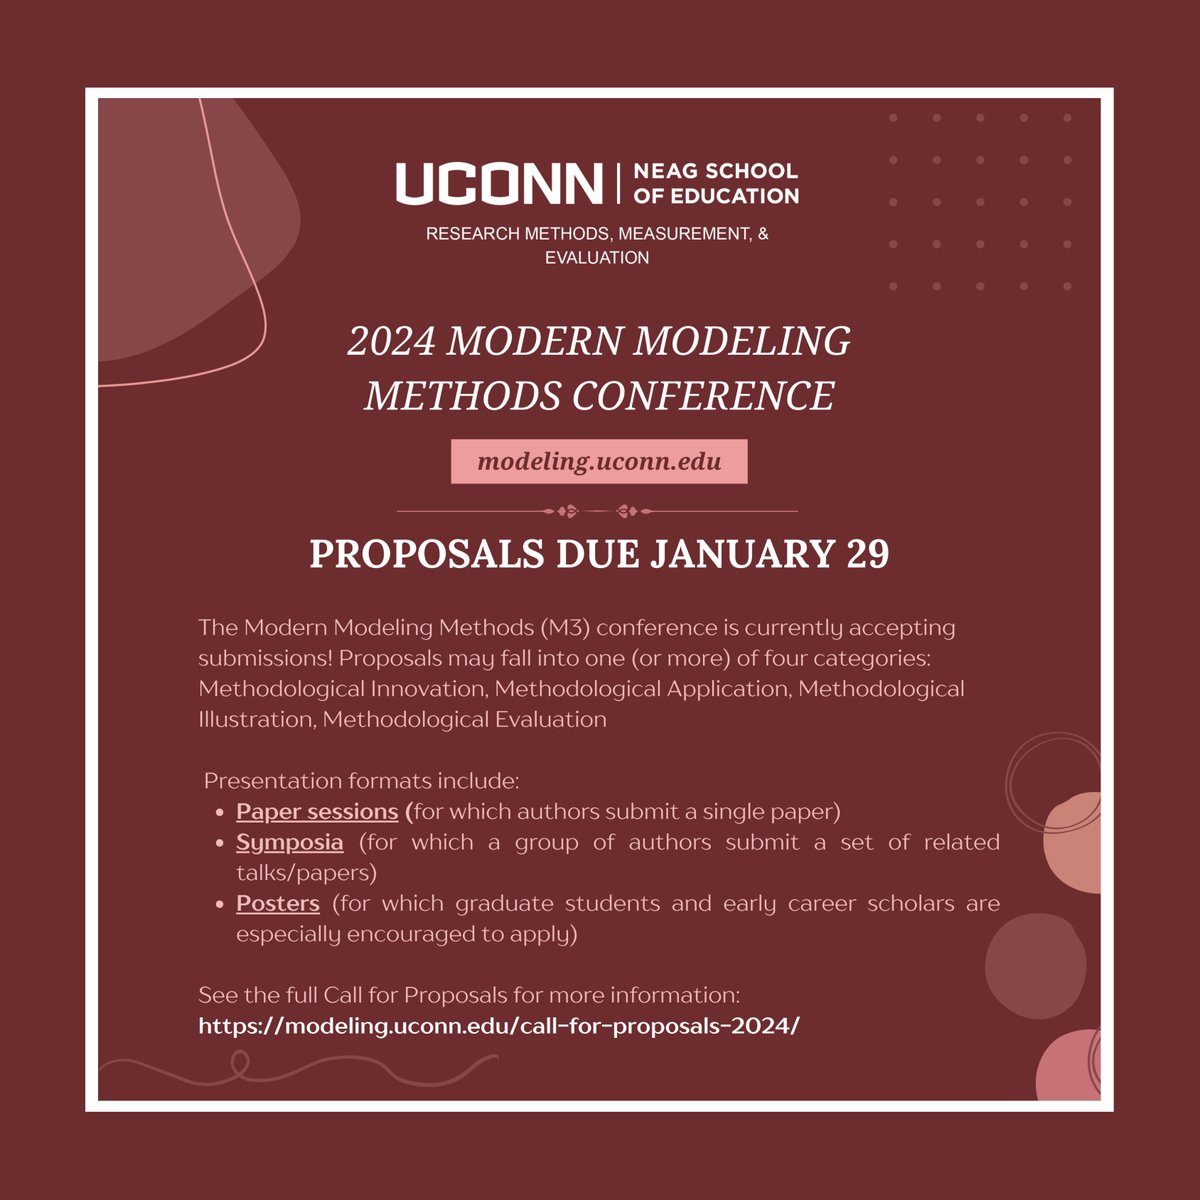 LAST CHANCE: M3 2024 Conference proposals are DUE TODAY (1/29)! #ApplyNowOnline
#ApplyNow #ModelingUConn

modeling.uconn.edu
rmme.education.uconn.edu

#interdisciplinary #statisticalanalysis #statisticalmodeling #statistics #StatsTwitter